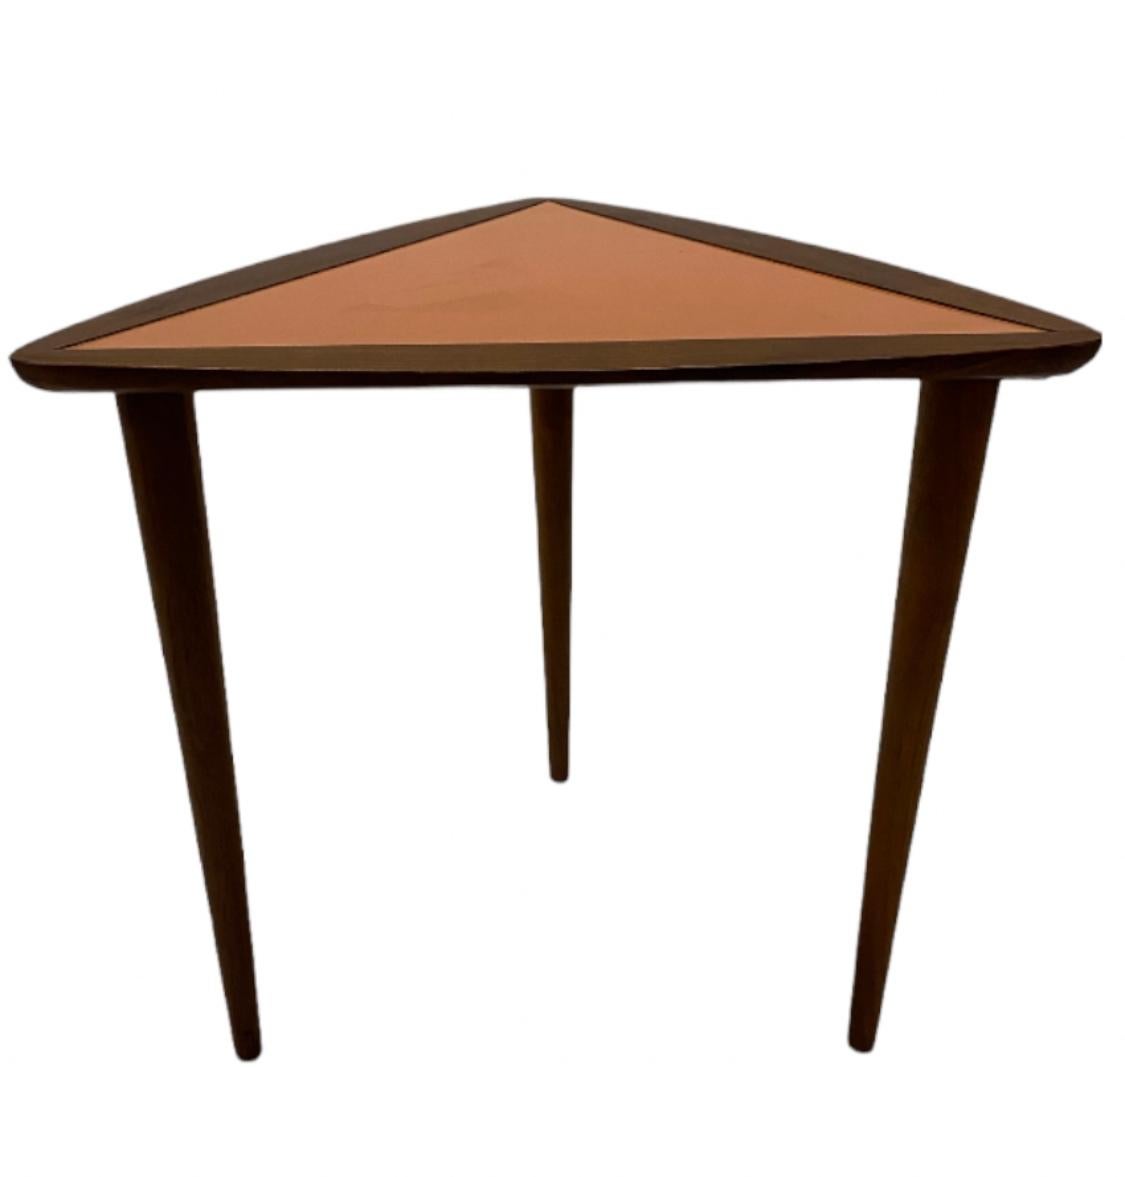 Arthur Umanoff triangular side table in walnut with original orange surface. Solid turned walnut legs can unscrew for easy storage and shipment. In good condition with great color and wood tones.